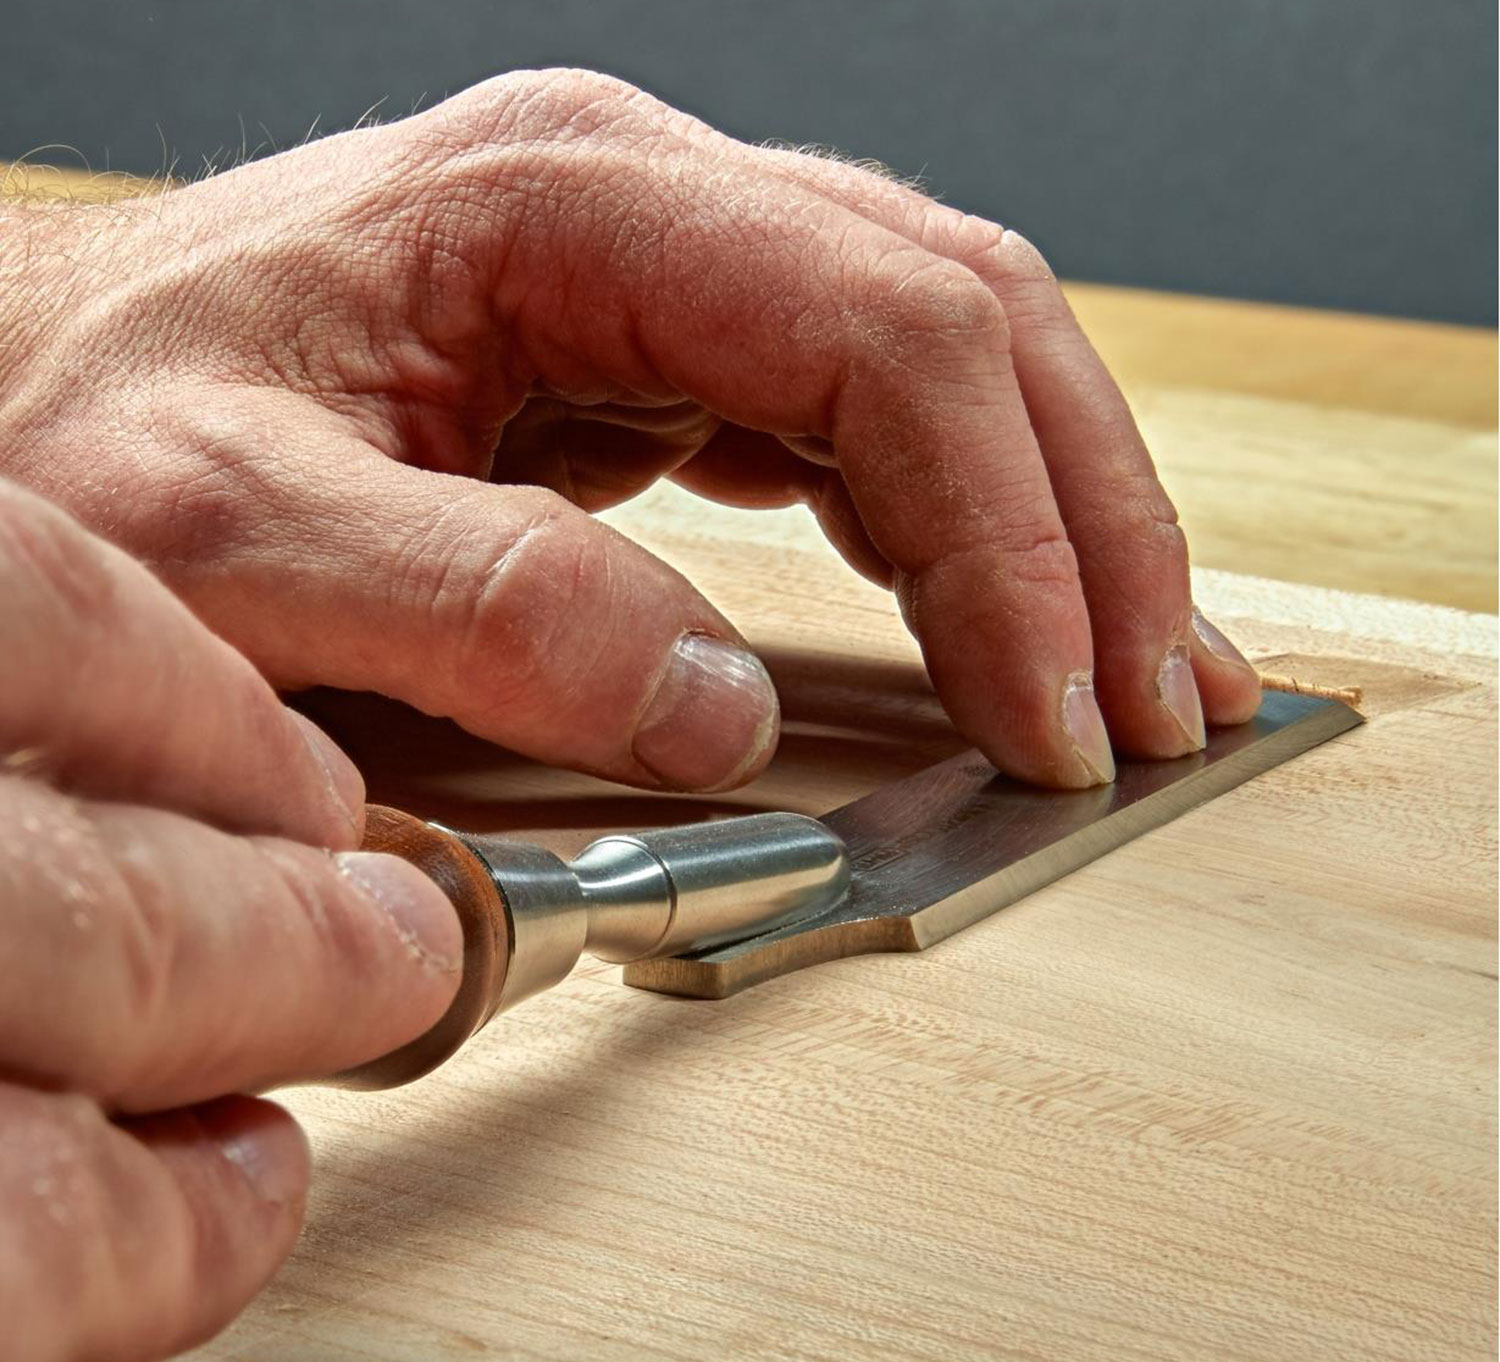 Correct grip for a flushing chisel- pushing the handle with the dominant hand, and keeping the blade against the work with the non-dominant hand.